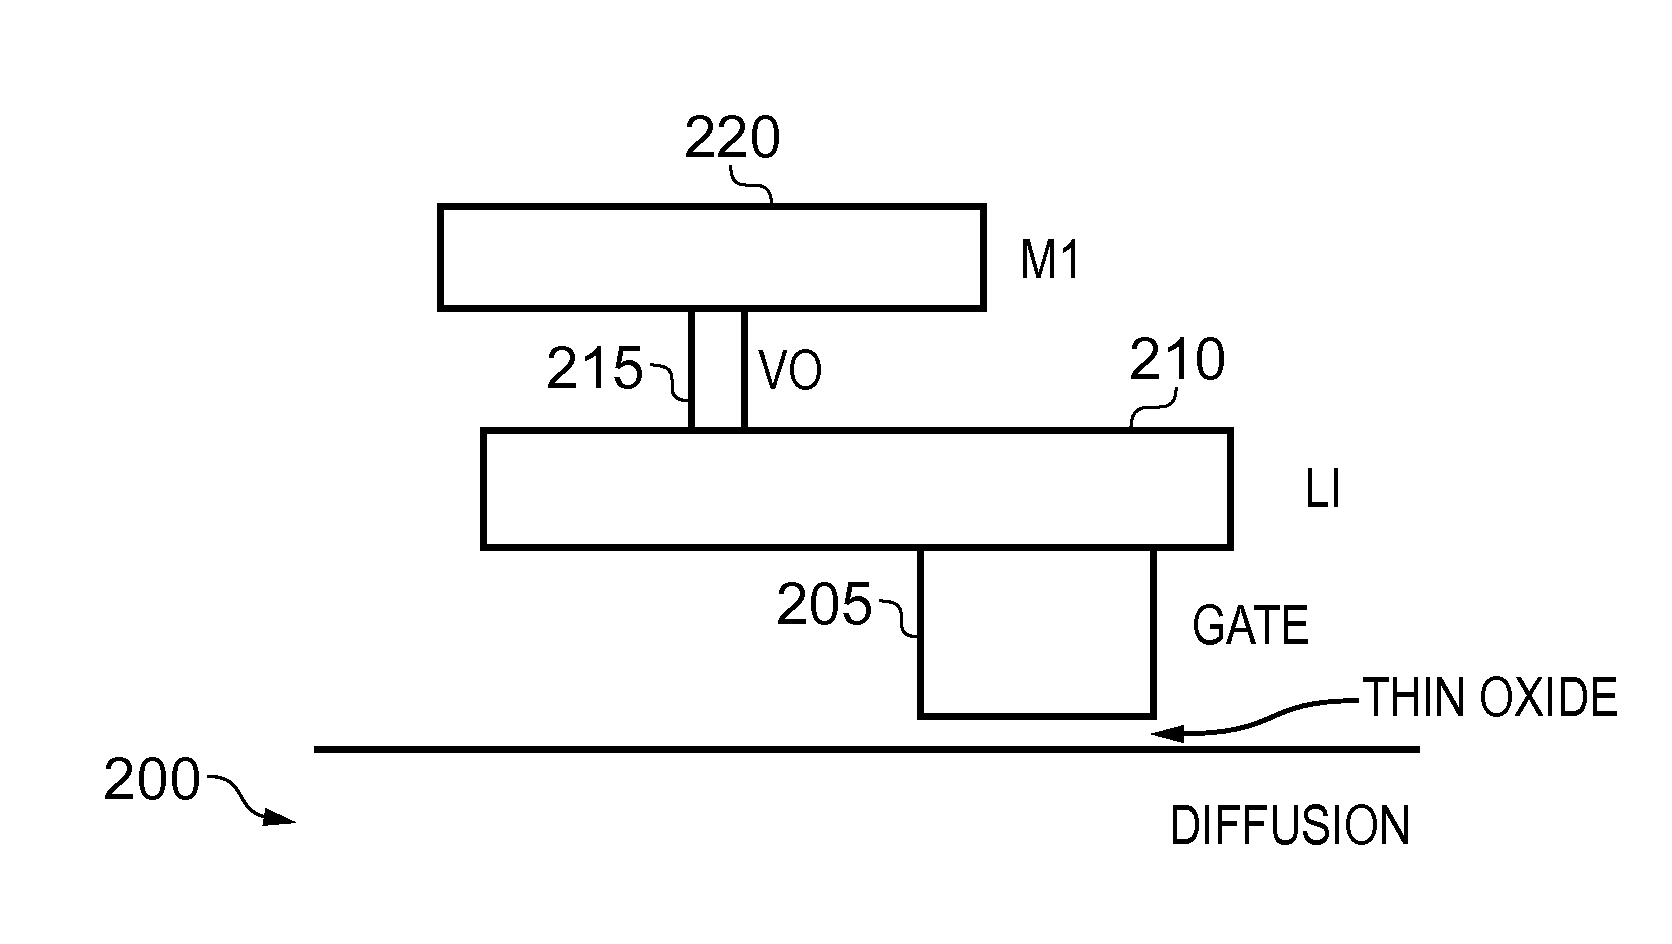 Computer implemented system and method for generating a layout of a cell defining a circuit component